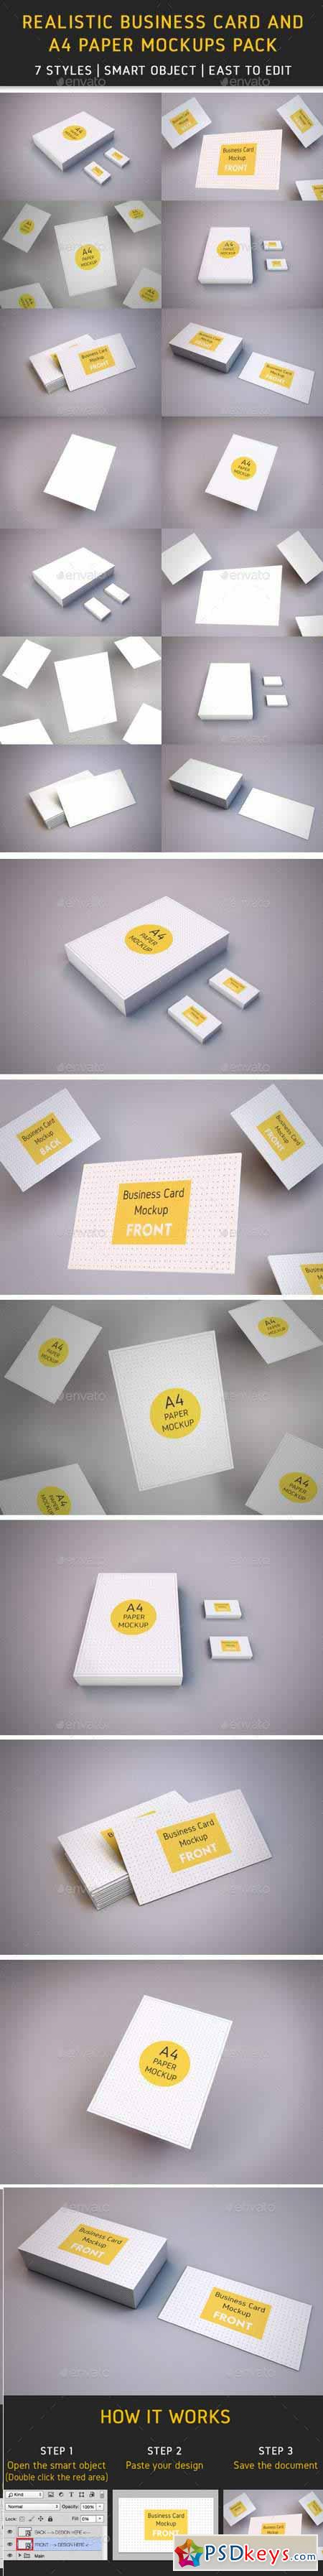 Realistic Business Card and A4 paper Mockup Pack 13192607